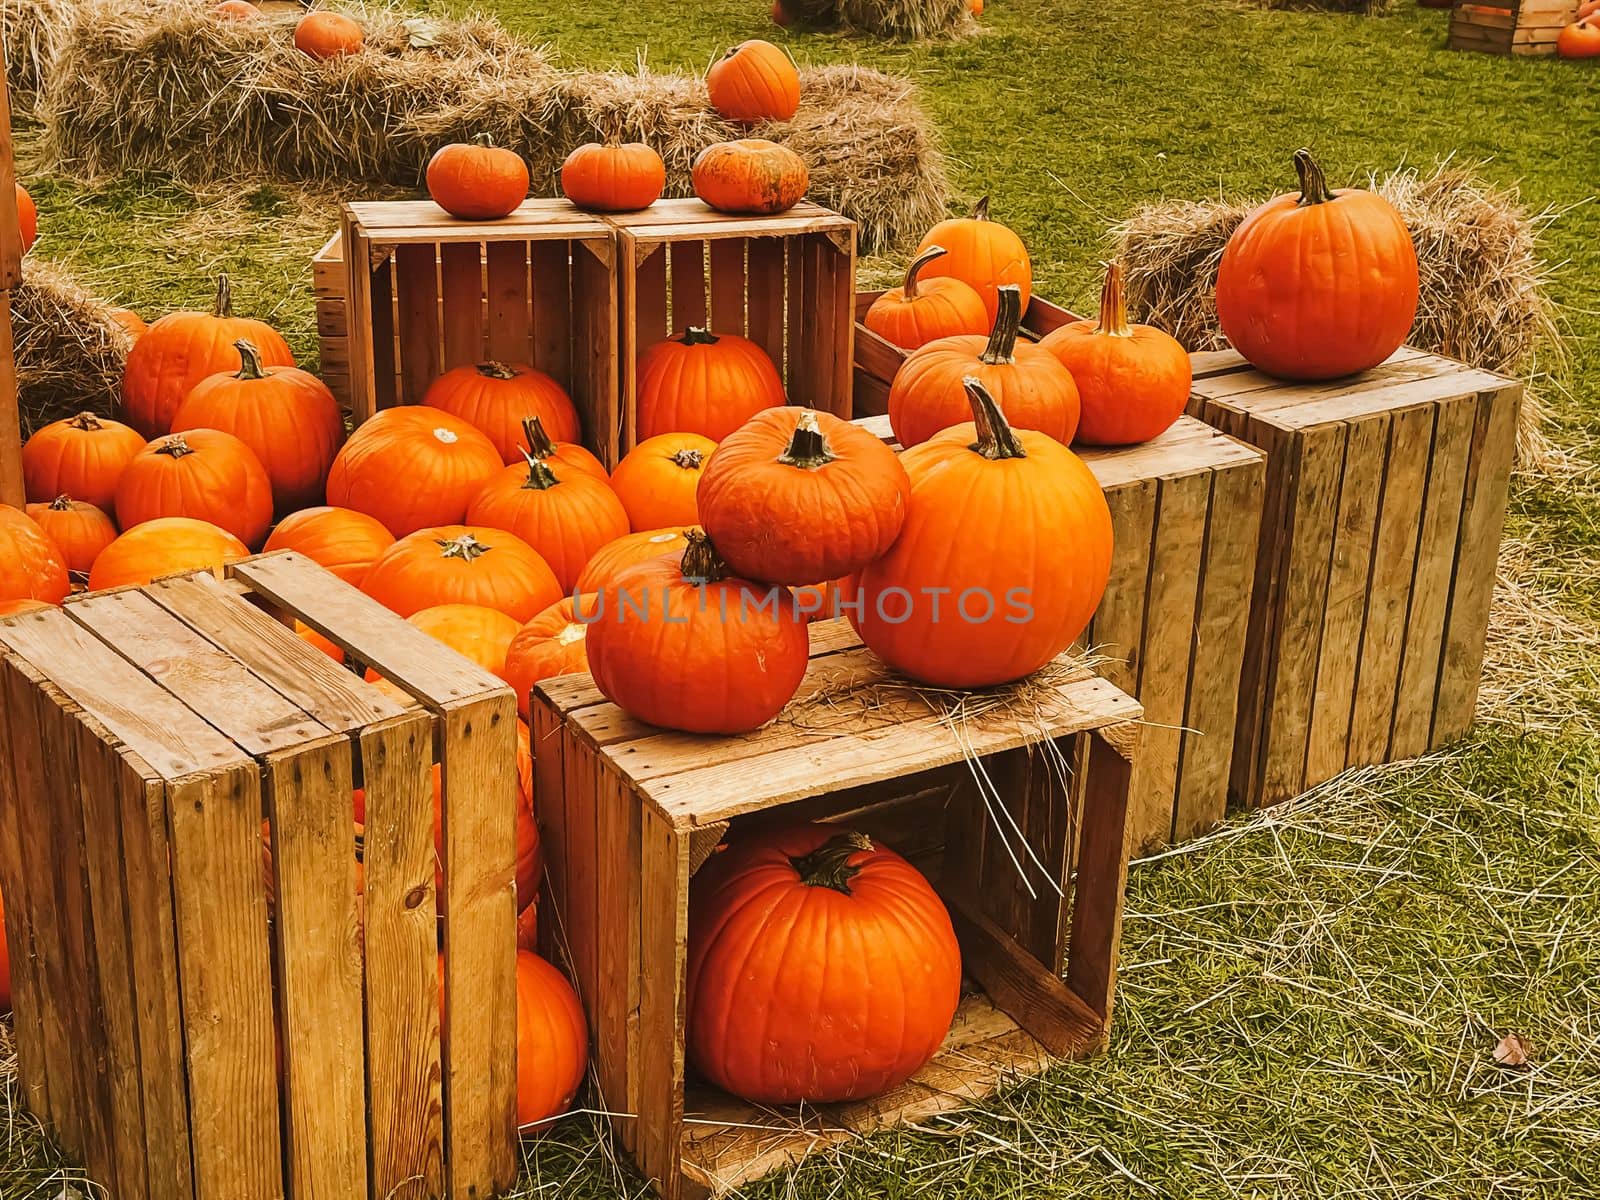 Halloween pumpkins and holiday decoration in autumn season rural field, pumpkin harvest and seasonal agriculture, outdoors in nature by Anneleven